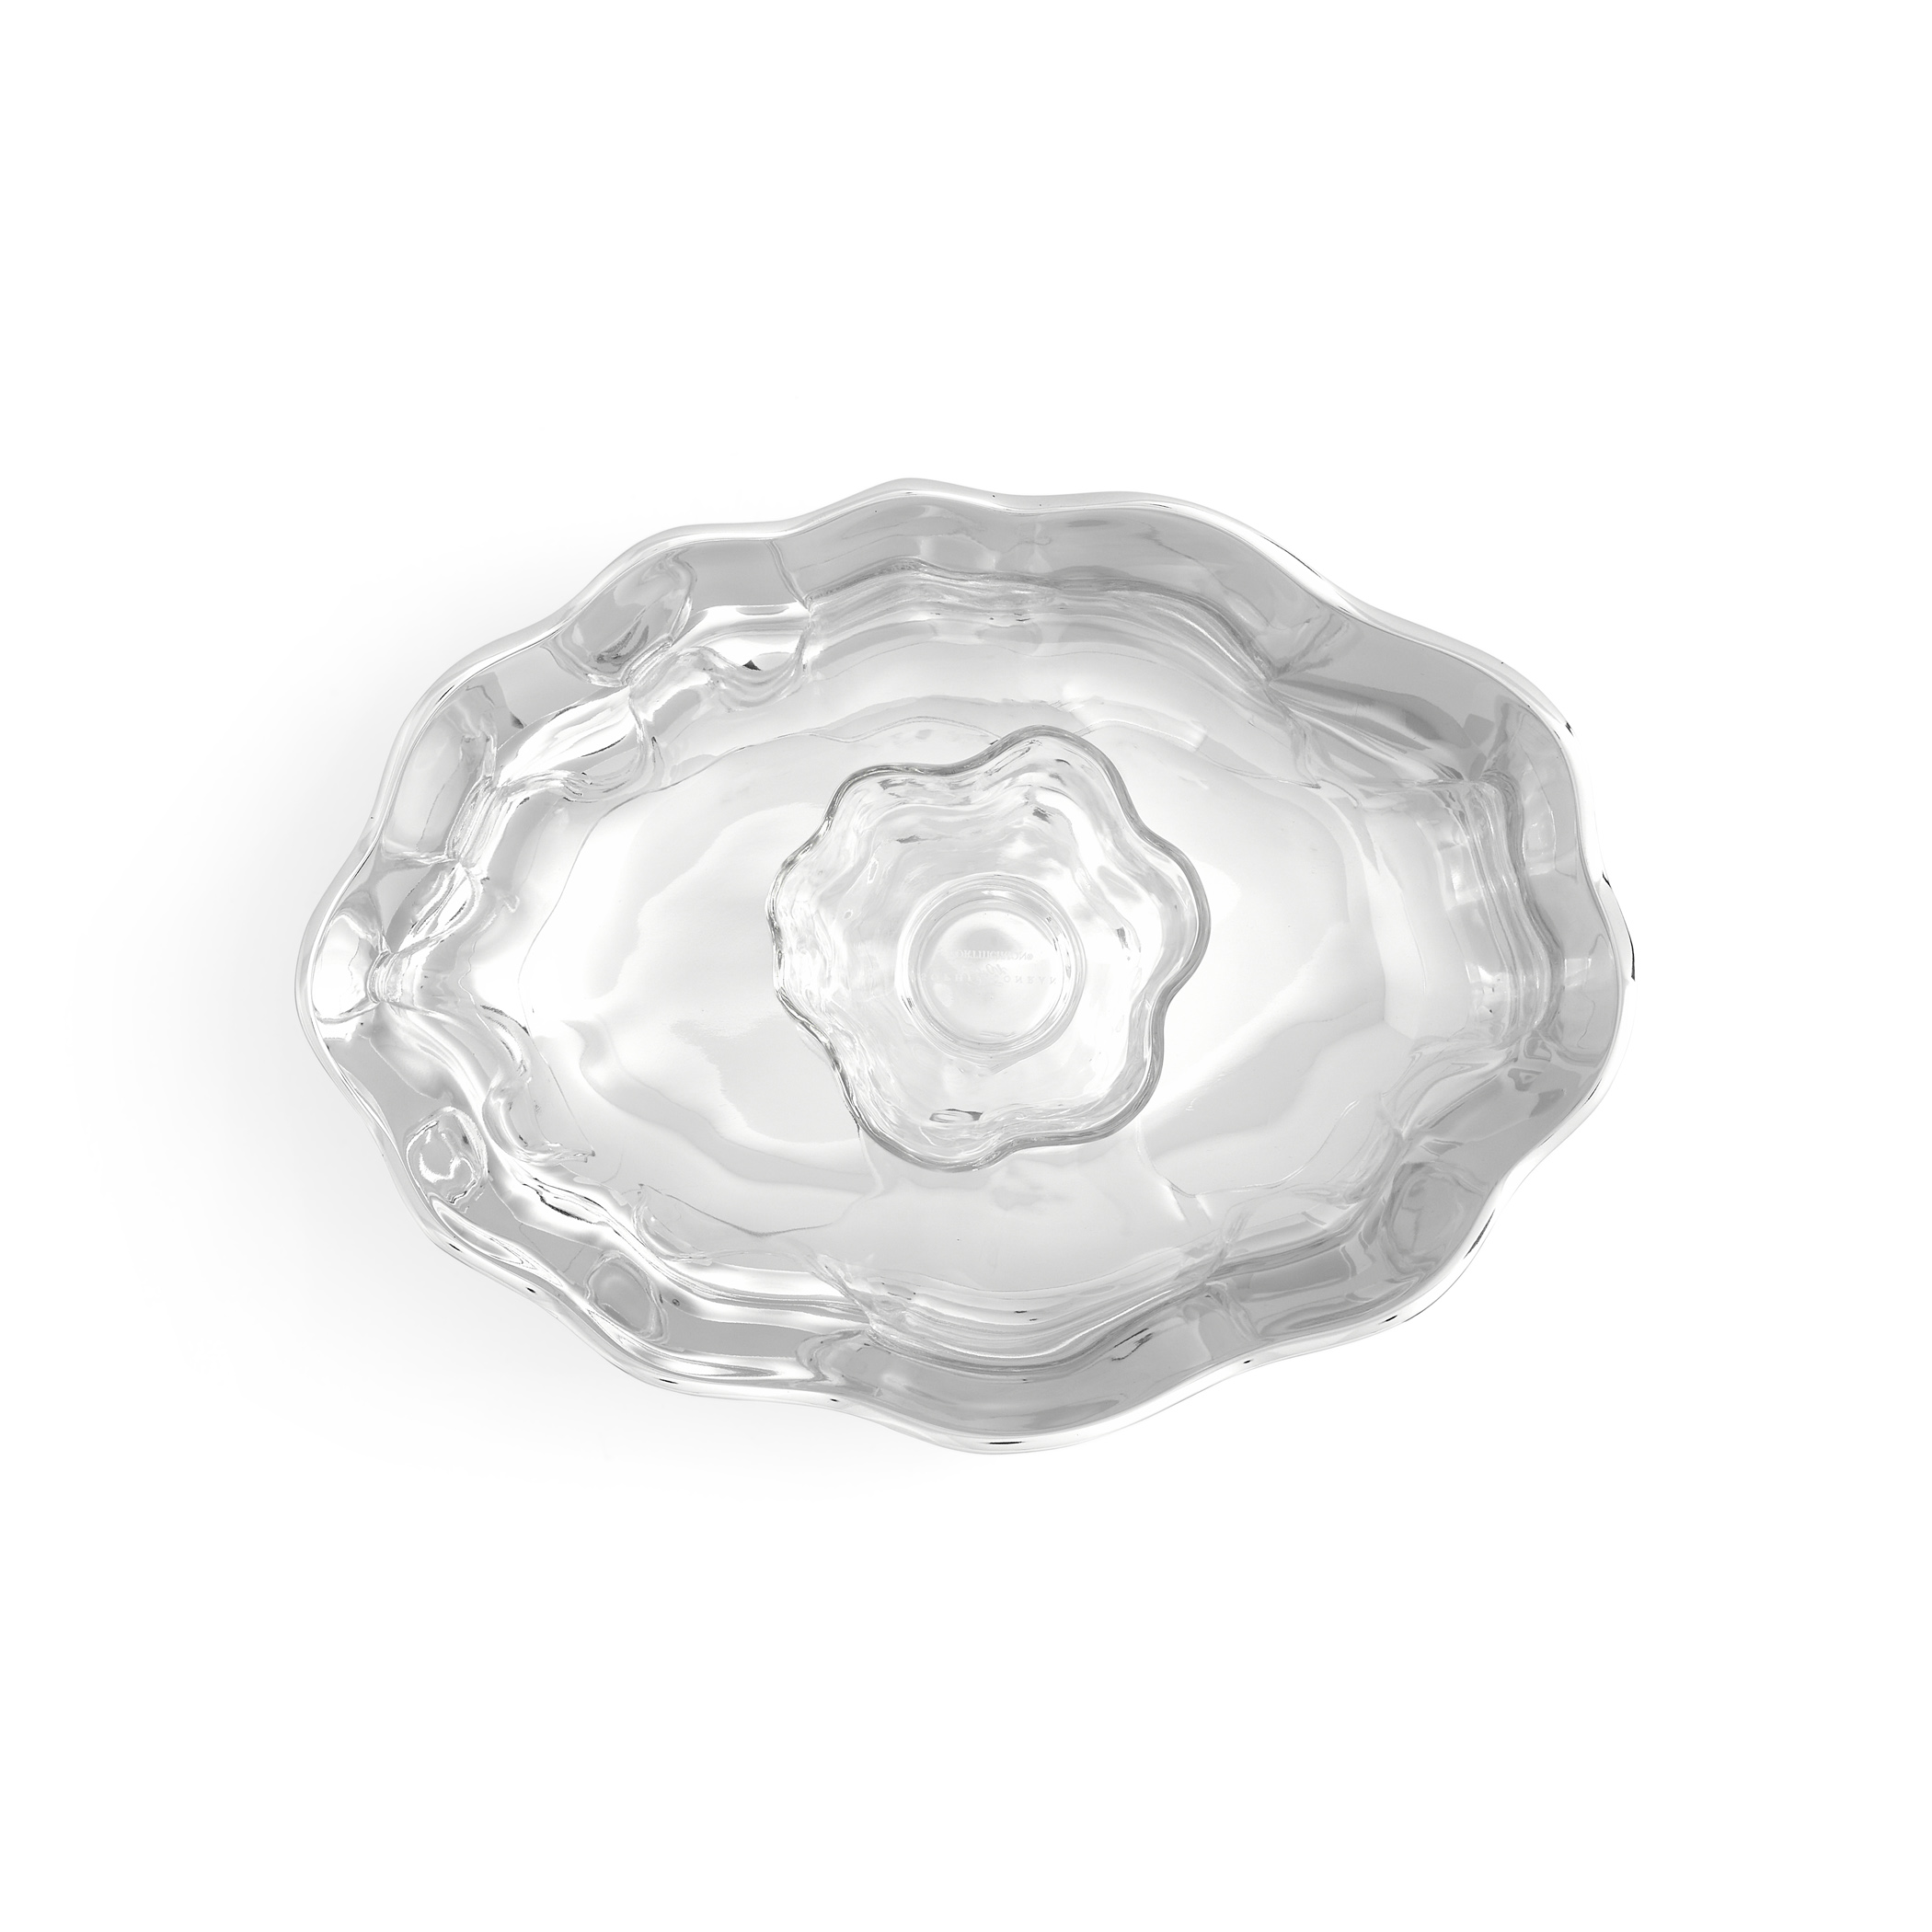 Sophie Conran Floret Alloy Chip and Dip image number null